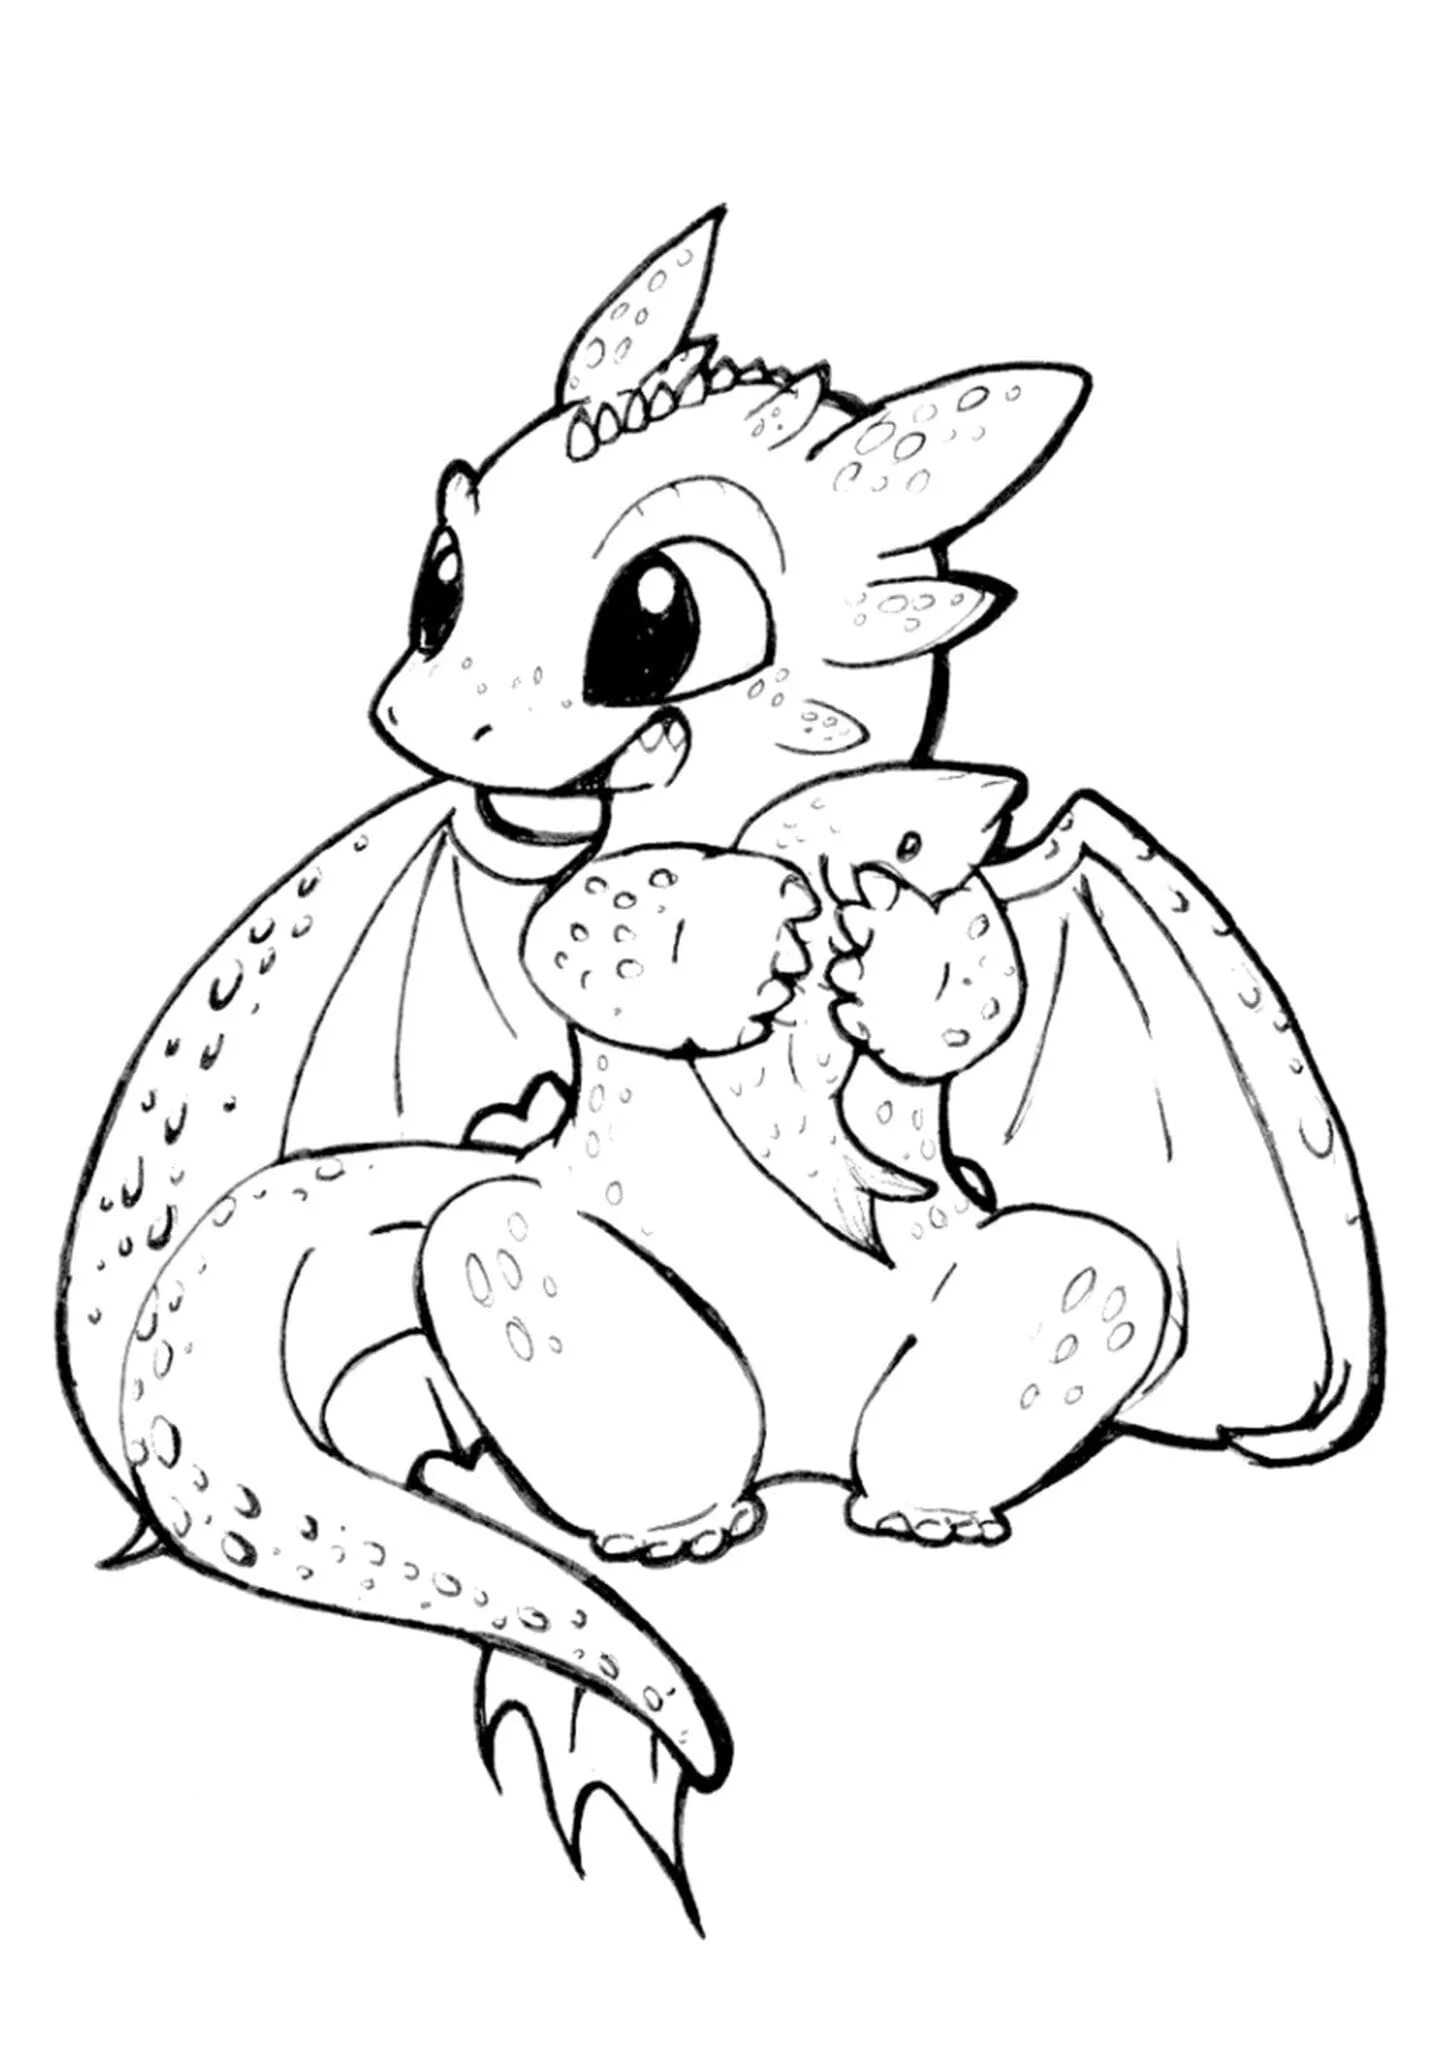 Cute and gorgeous dragon coloring book